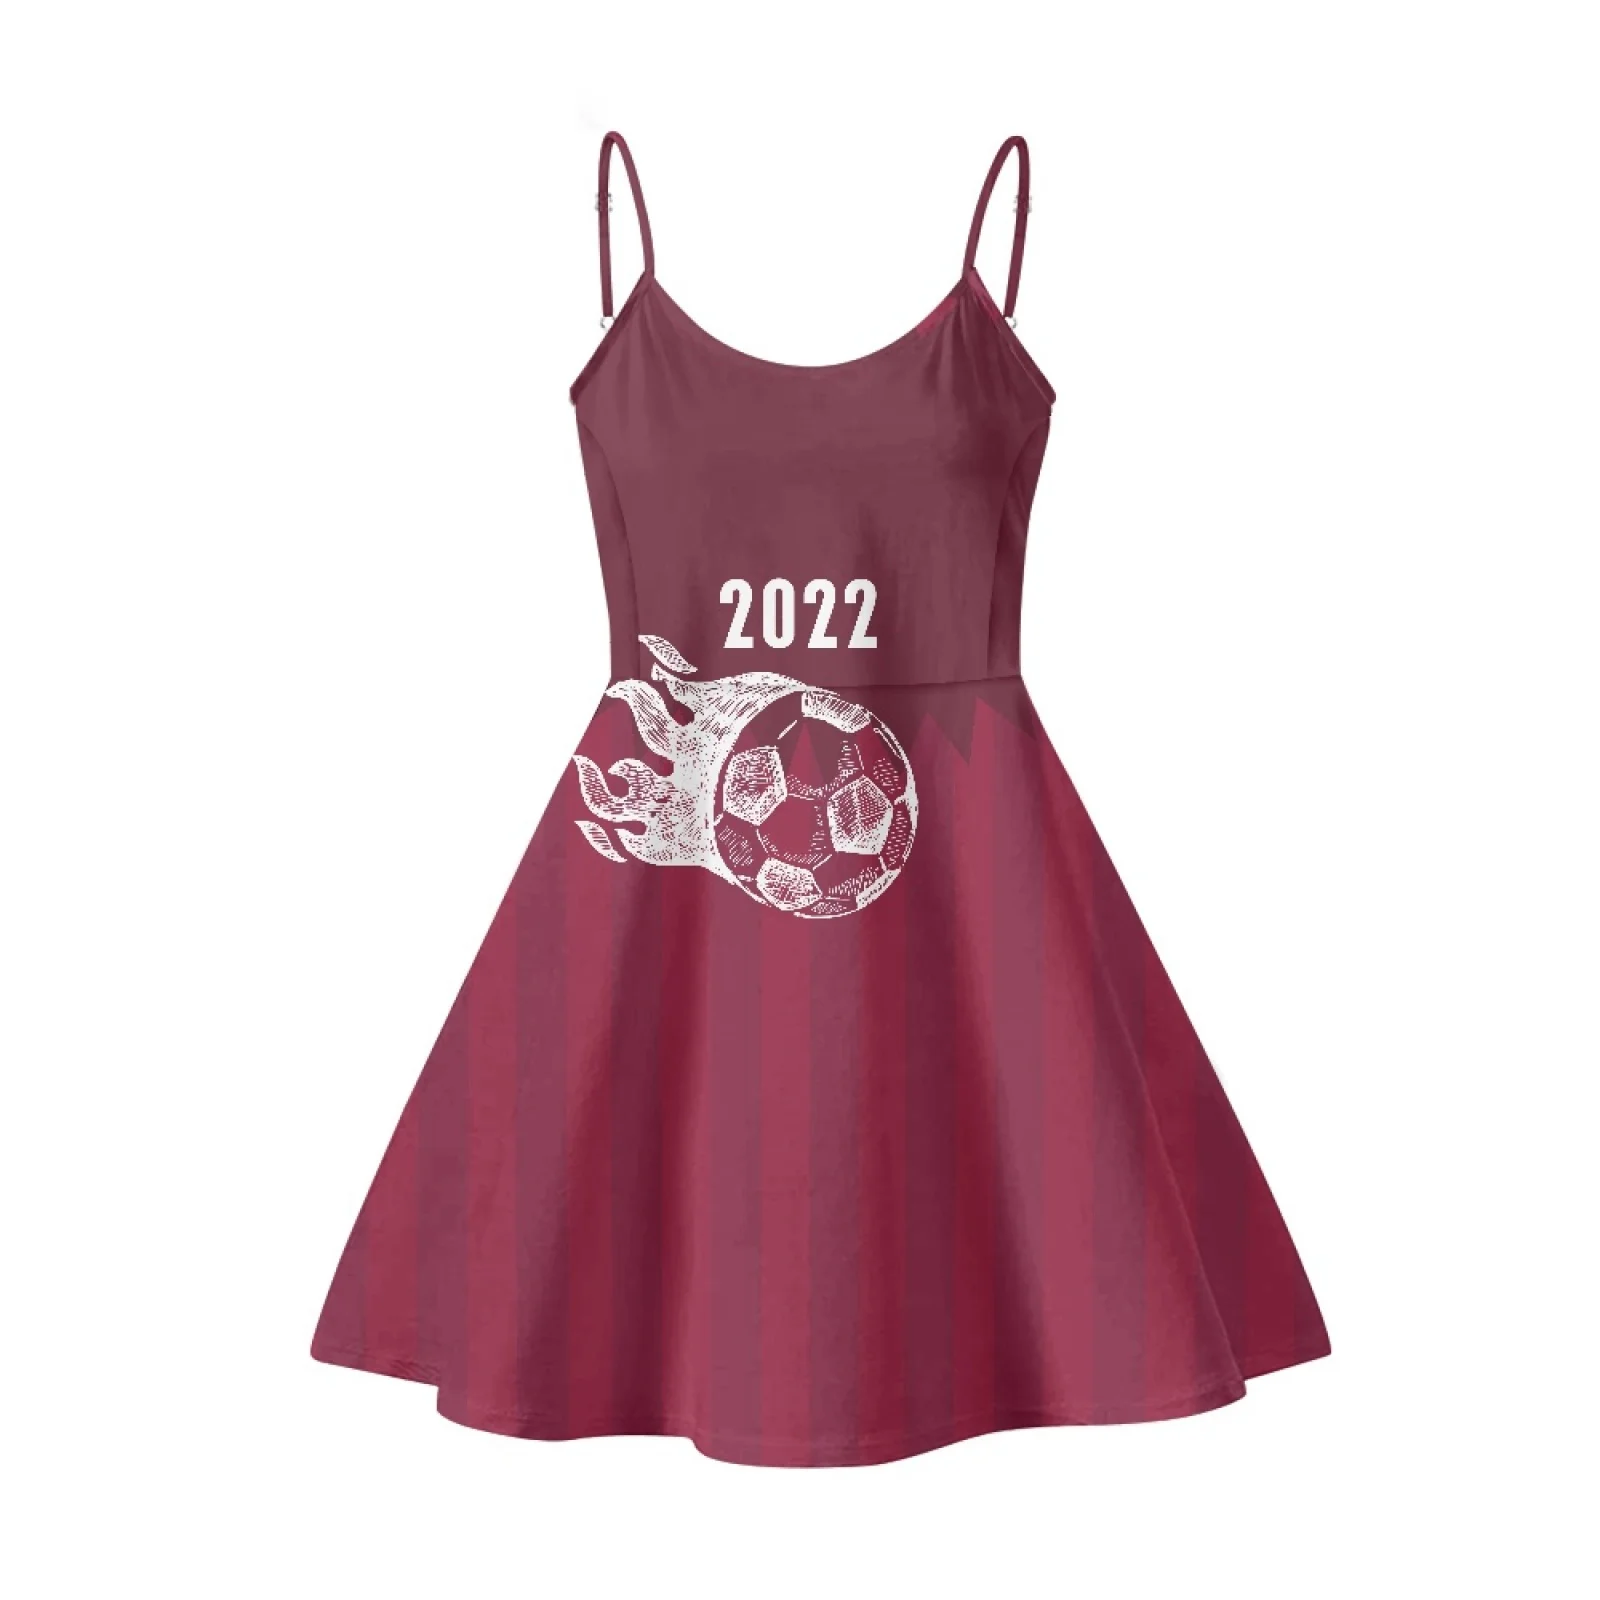 Qatar Football Soccer Game 2022 Prints Sexy Party Dress for Girl Summer One Piece Sundress Beach Strappy Knee Length Dress